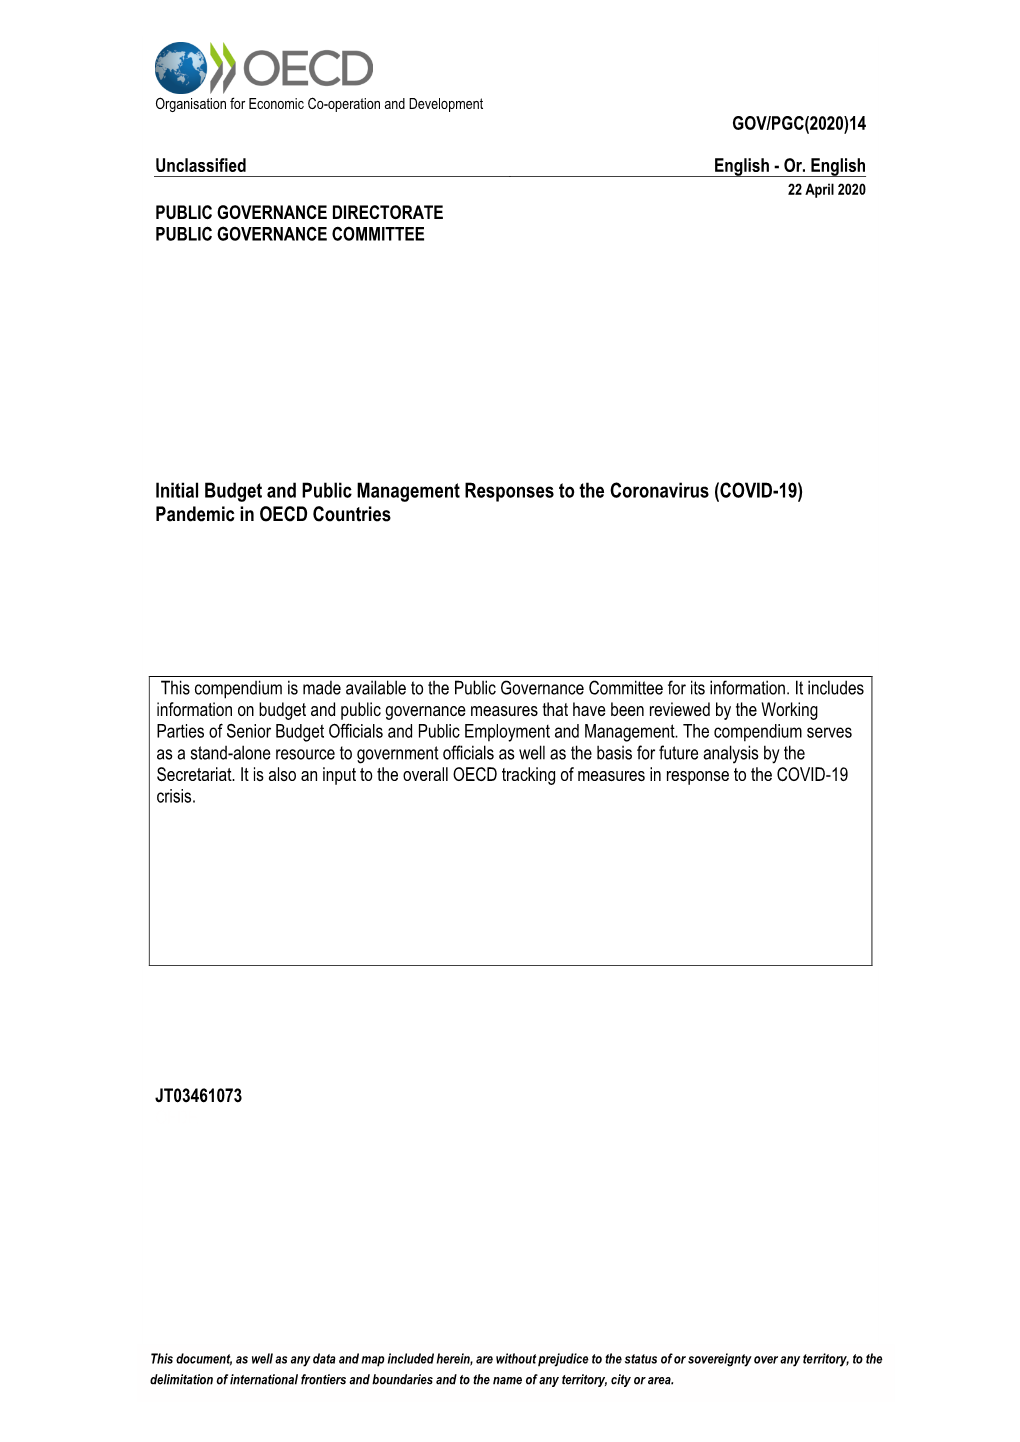 Initial Budget and Public Management Responses to the Coronavirus (COVID-19) Pandemic in OECD Countries